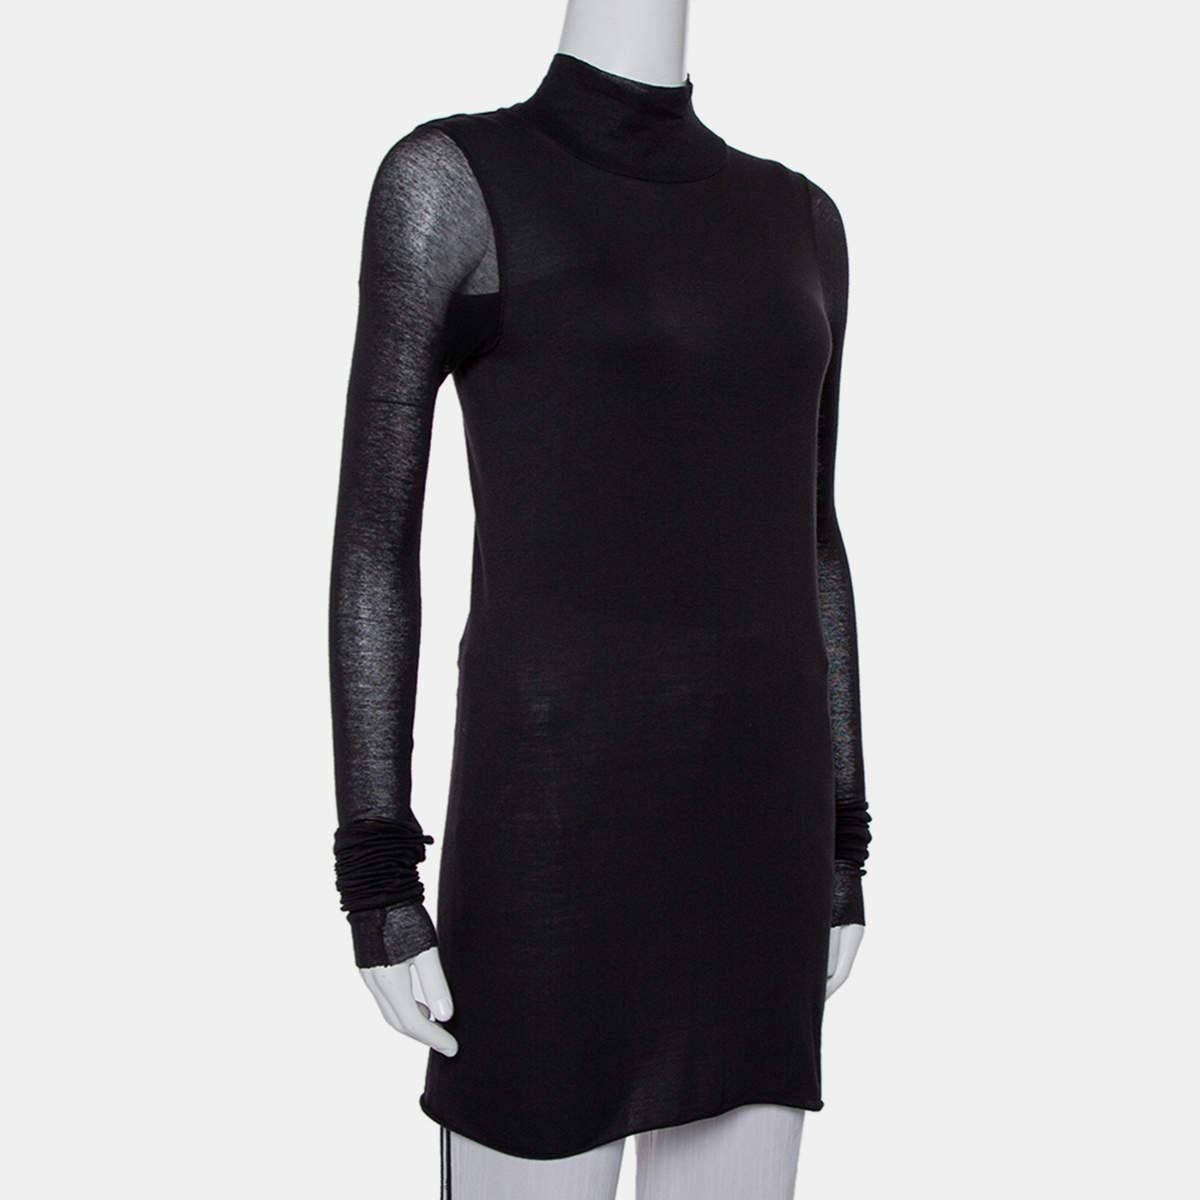 This black mini dress is from the Rick Owens Lilies Collection. Knit using quality materials, the dress has a turtleneck design, long sleeves, and a sheer effect.

Includes: Brand tag